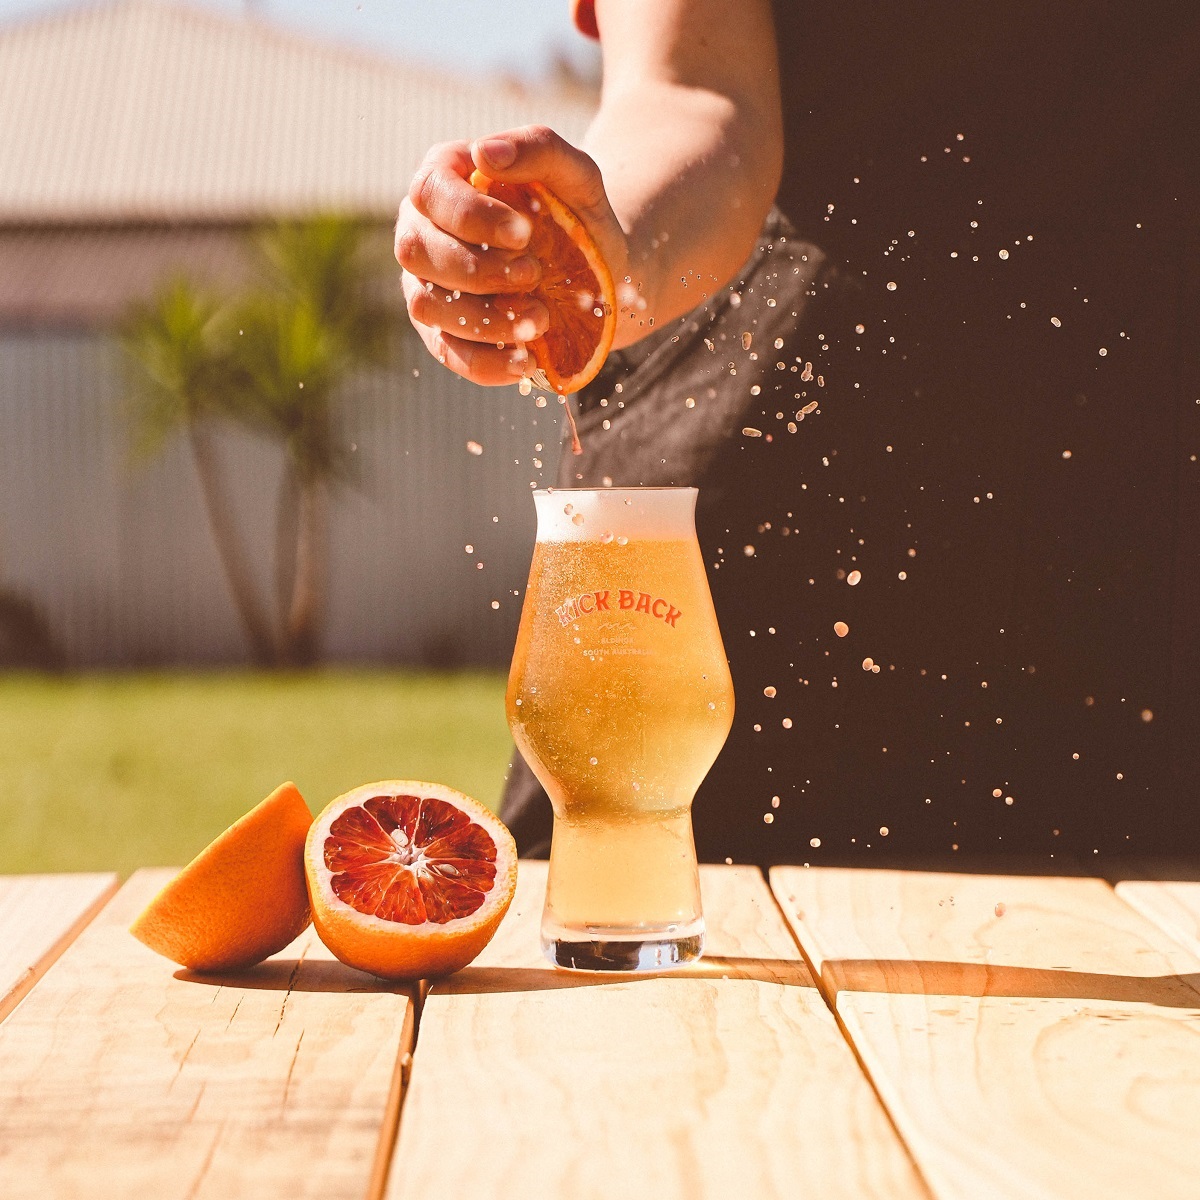 A hand squeezes a blood orange into a cold beer glass atop a timber table.